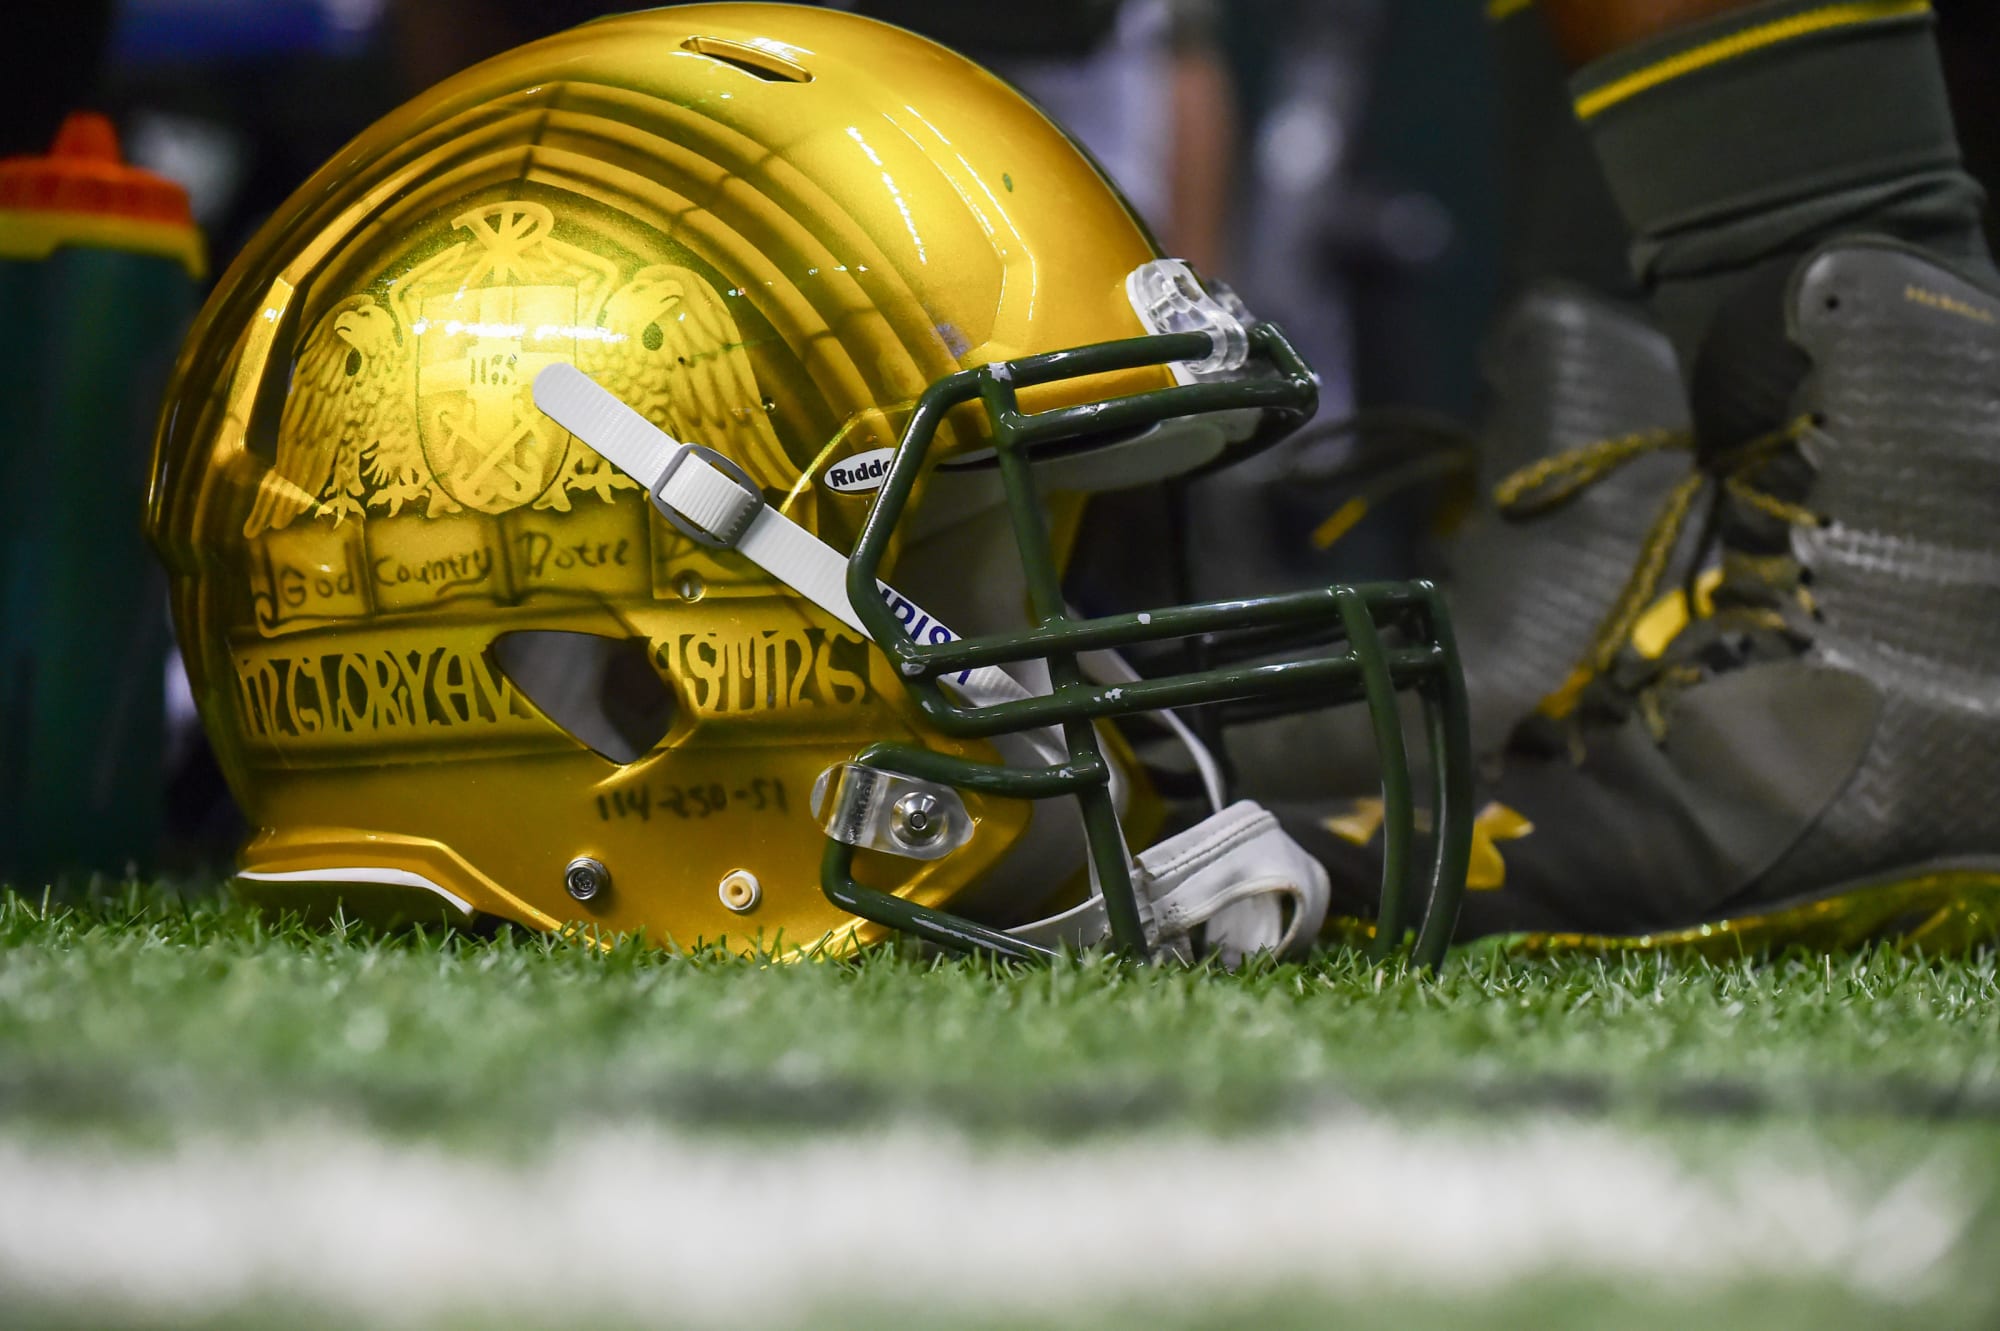 Notre Dame unveils Yankees-inspired uniforms for Shamrock Series game